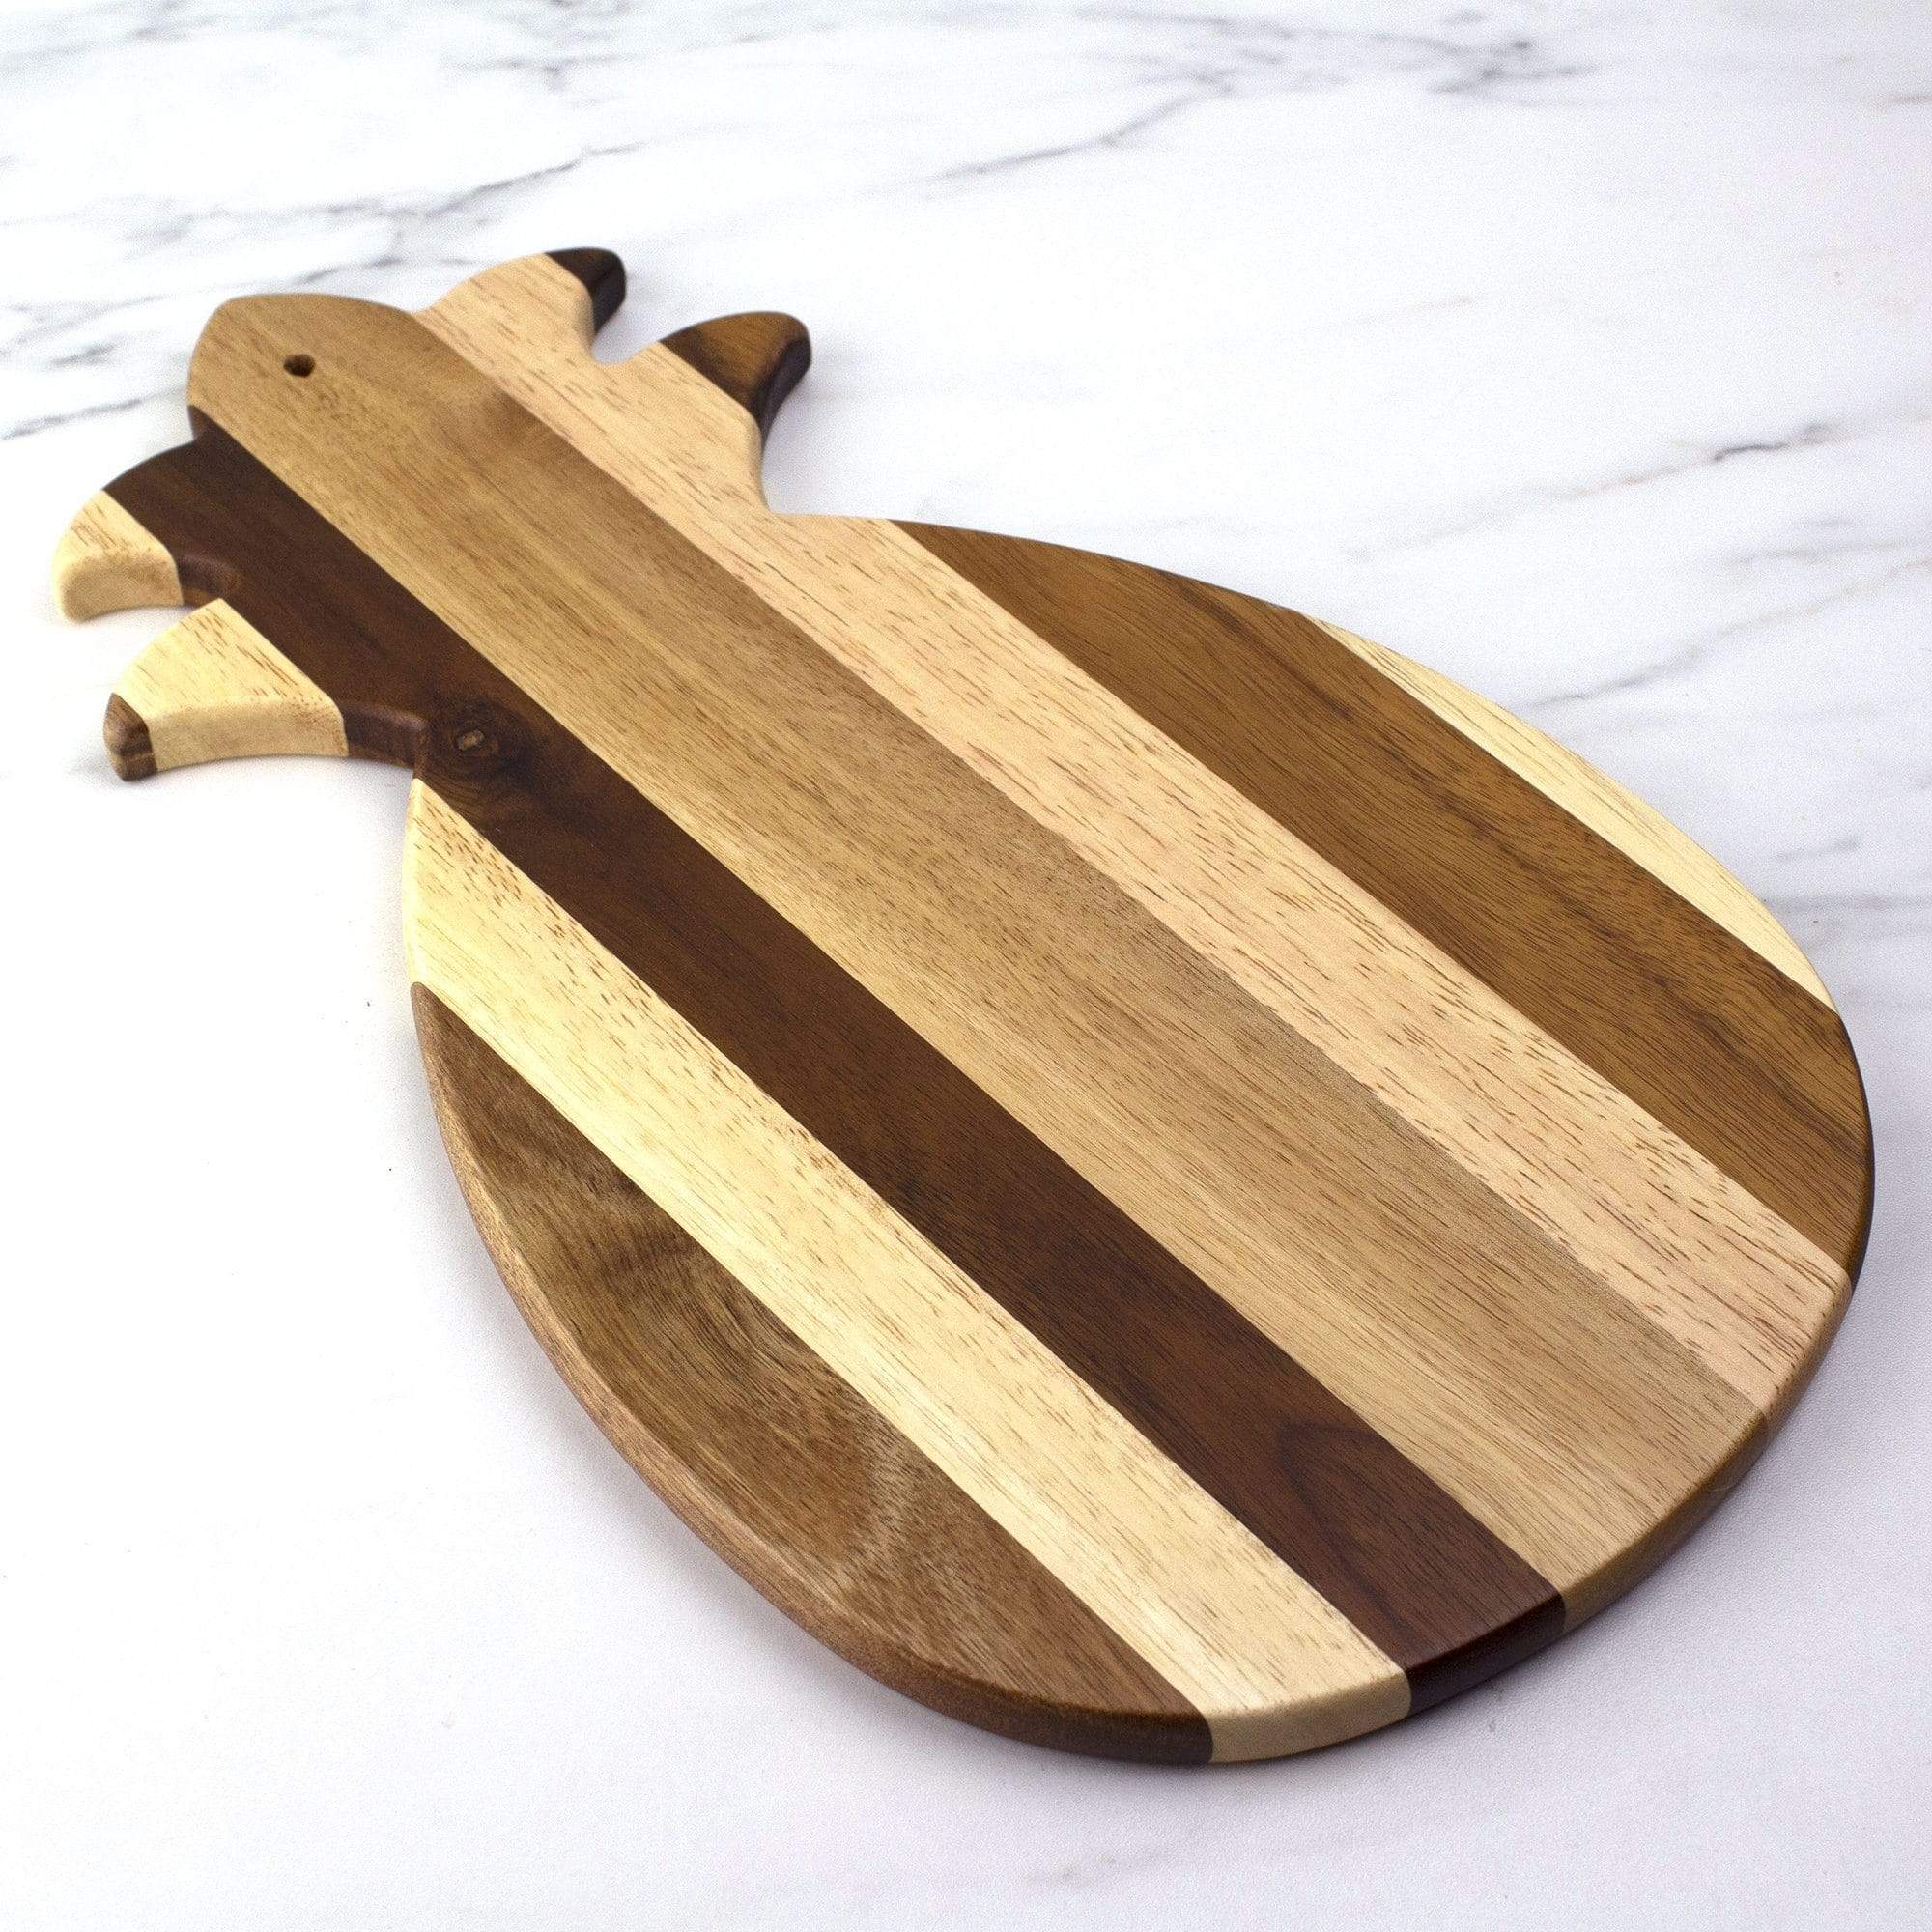 https://totallybamboo.com/cdn/shop/products/rock-branchr-shiplap-series-pineapple-shaped-wood-serving-and-cutting-board-totally-bamboo-822642.jpg?v=1628014581